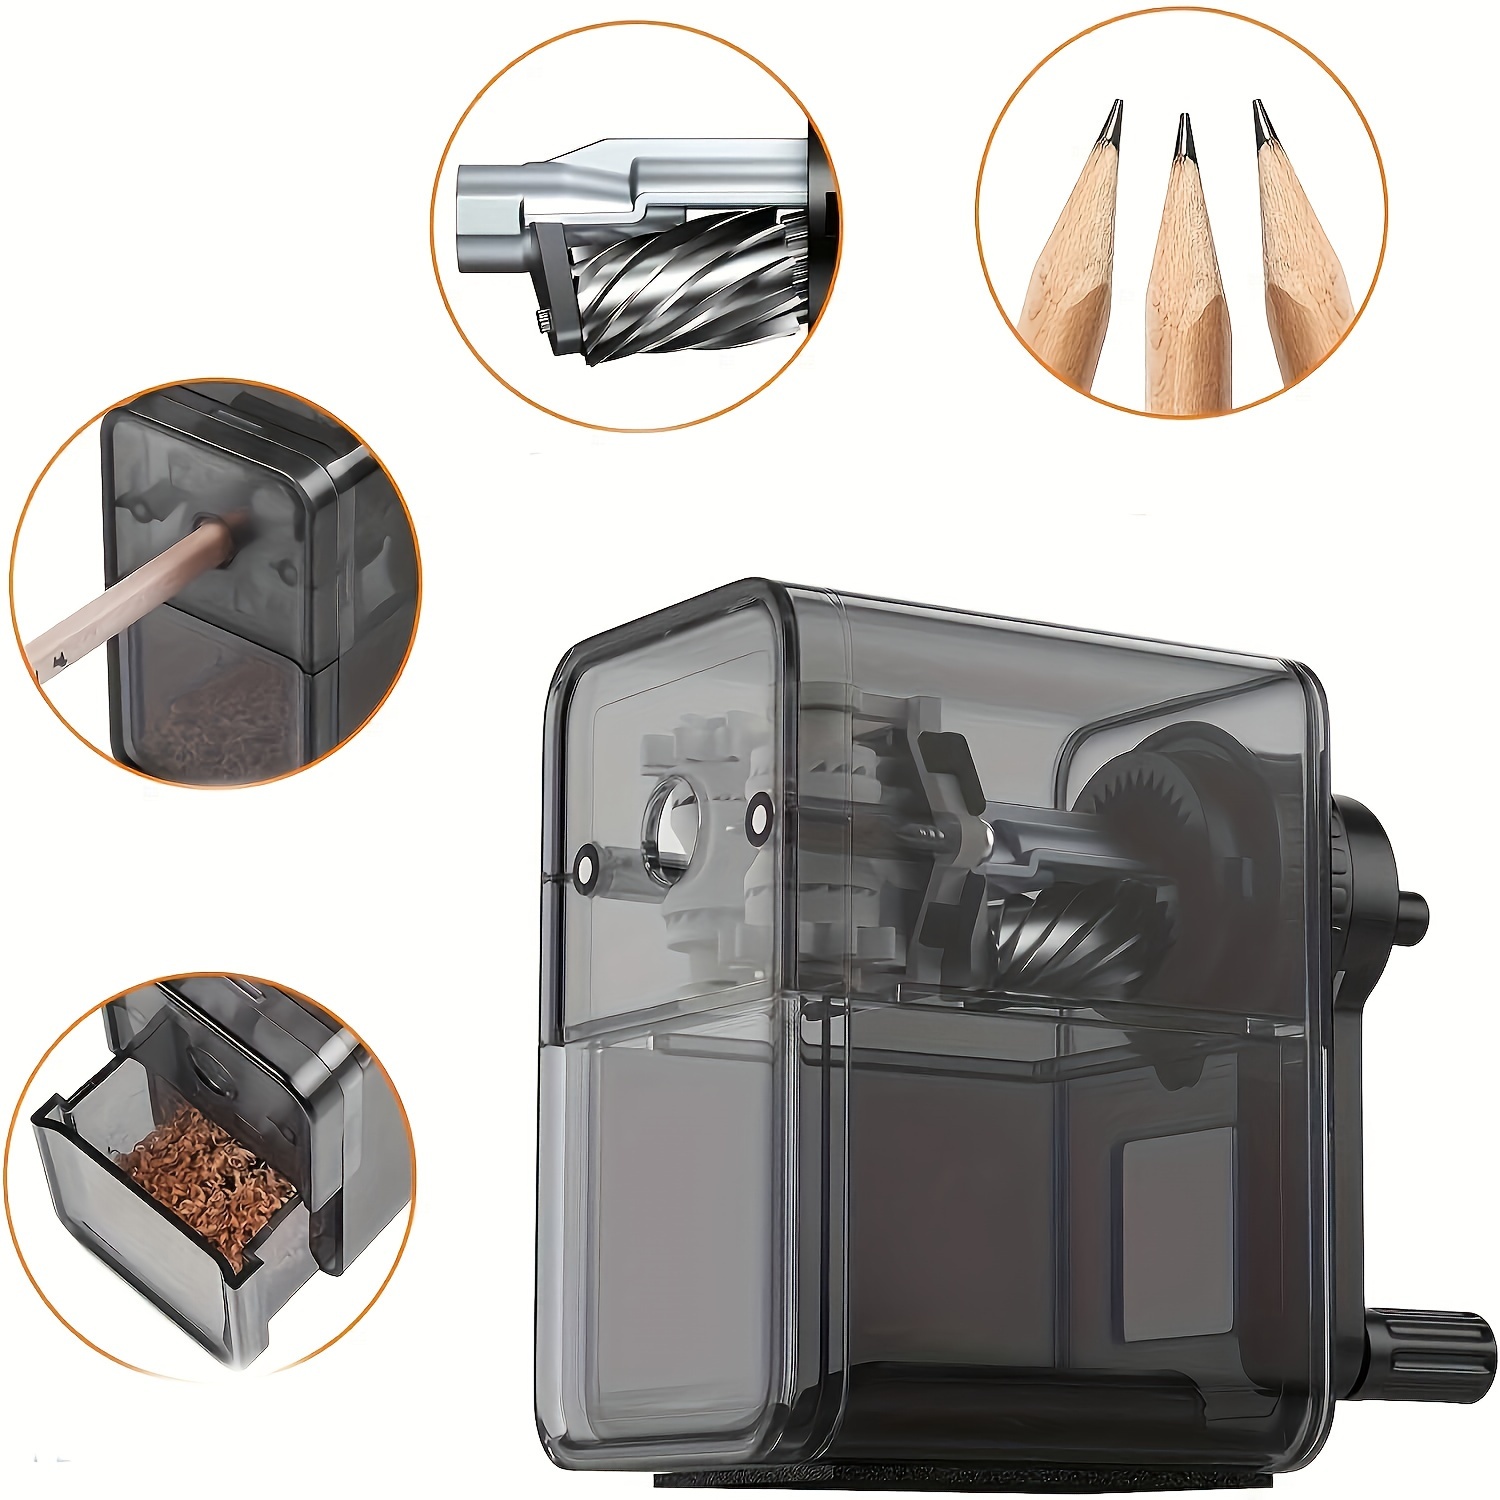 M&G Stationery Art Sketch Charcoal Pencil Special Pencil Sharpener  Adjustable Pencil Sharpener Automatic Pen Turning Knife School Supplies  Black